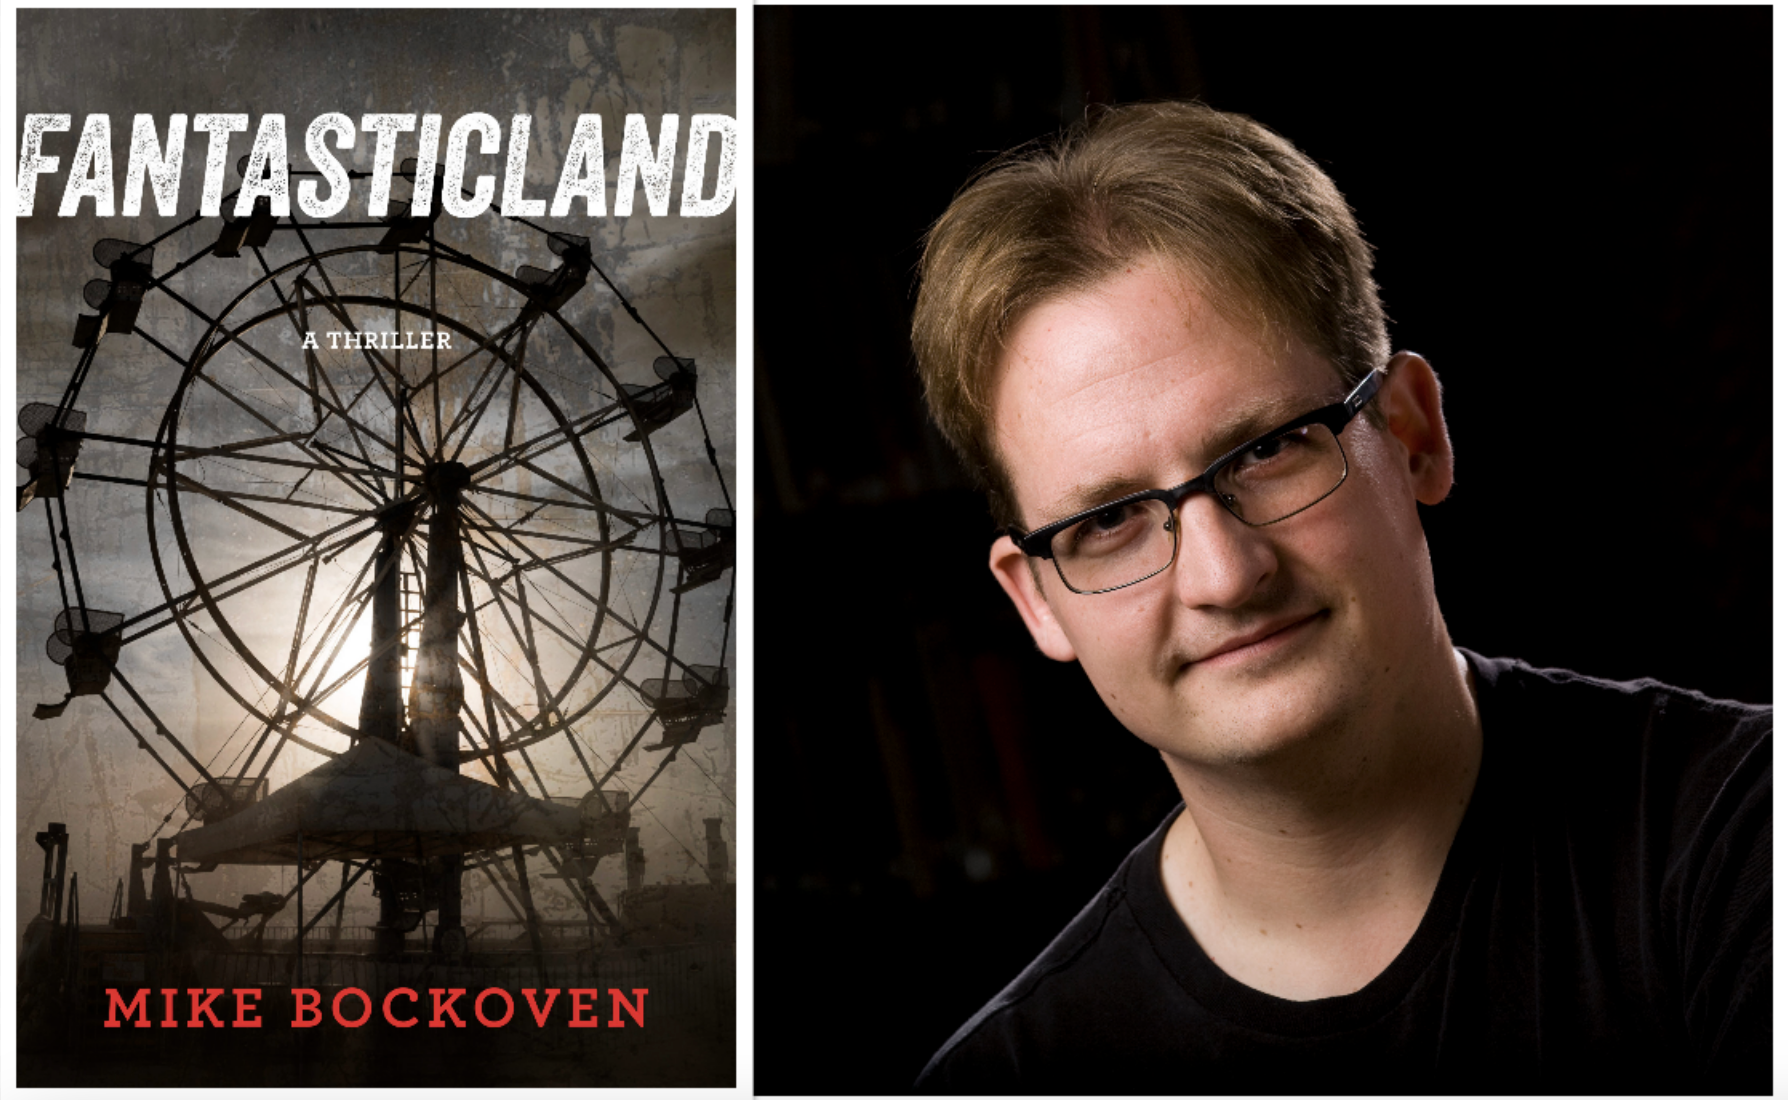 An interview with 'FantasticLand' author Mike Bockoven